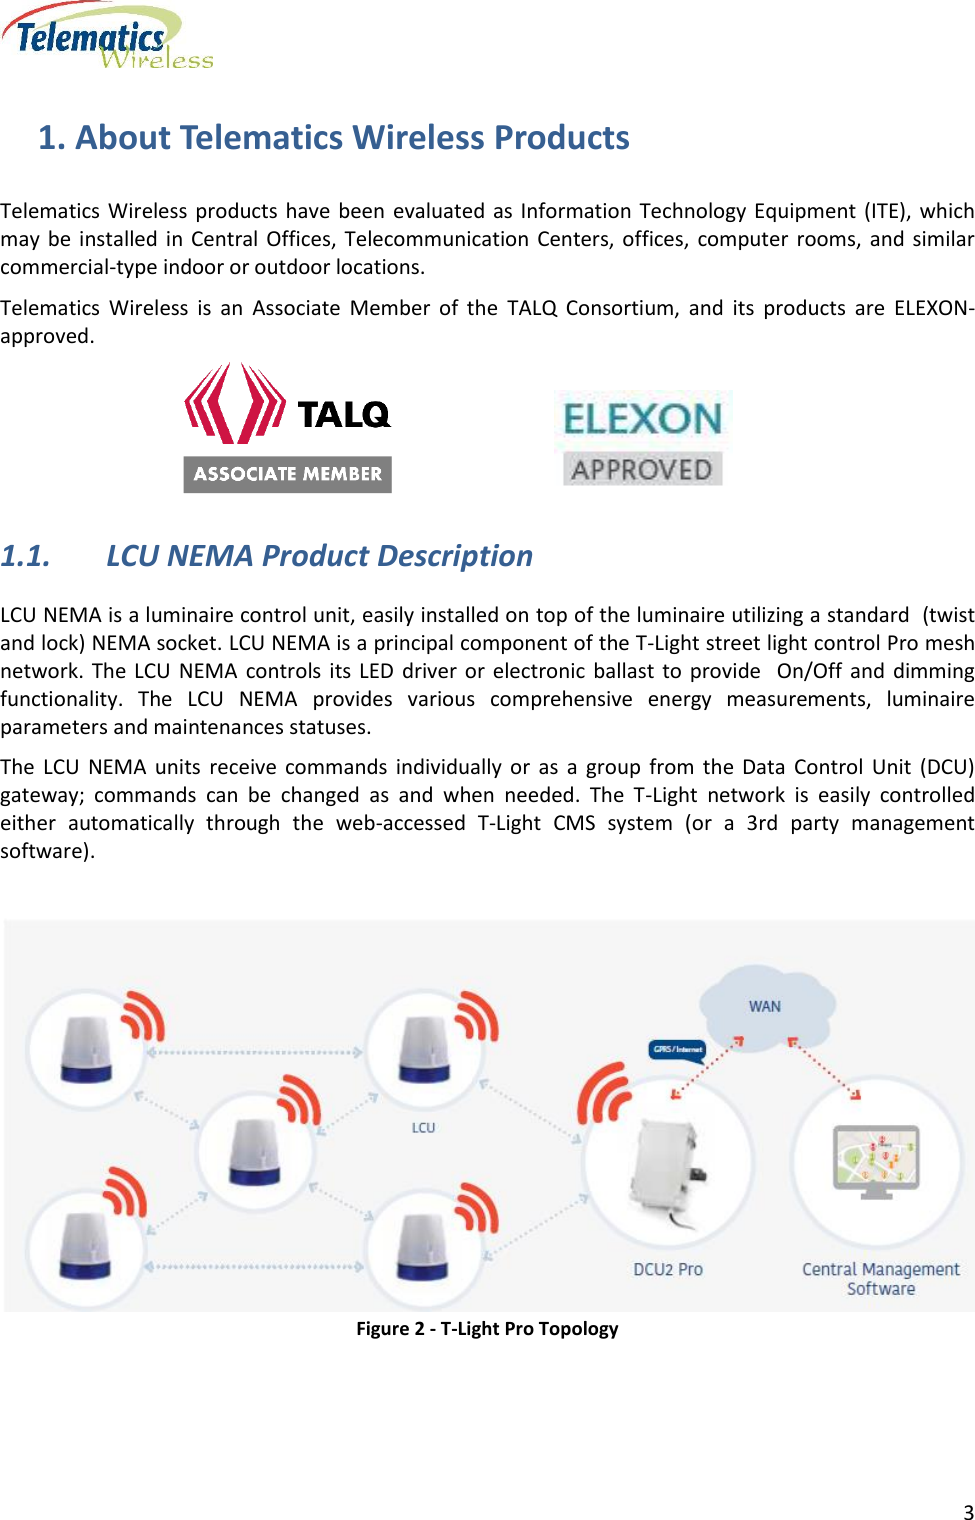      3  1. About Telematics Wireless Products Telematics Wireless products  have  been  evaluated  as Information Technology Equipment  (ITE),  which may  be  installed in Central Offices, Telecommunication  Centers,  offices,  computer rooms,  and  similar commercial-type indoor or outdoor locations. Telematics  Wireless  is  an  Associate  Member  of  the  TALQ  Consortium,  and  its  products  are  ELEXON-approved.                                                                      1.1. LCU NEMA Product Description LCU NEMA is a luminaire control unit, easily installed on top of the luminaire utilizing a standard  (twist and lock) NEMA socket. LCU NEMA is a principal component of the T-Light street light control Pro mesh  network. The LCU  NEMA  controls its LED  driver  or  electronic  ballast  to  provide    On/Off  and  dimming functionality.  The  LCU  NEMA  provides  various  comprehensive  energy  measurements,  luminaire parameters and maintenances statuses. The  LCU  NEMA  units  receive  commands  individually  or  as  a  group  from  the  Data  Control  Unit  (DCU) gateway;  commands  can  be  changed  as  and  when  needed.  The  T-Light  network  is  easily  controlled either  automatically  through  the  web-accessed  T-Light  CMS  system  (or  a  3rd  party  management software).   Figure 2 - T-Light Pro Topology   